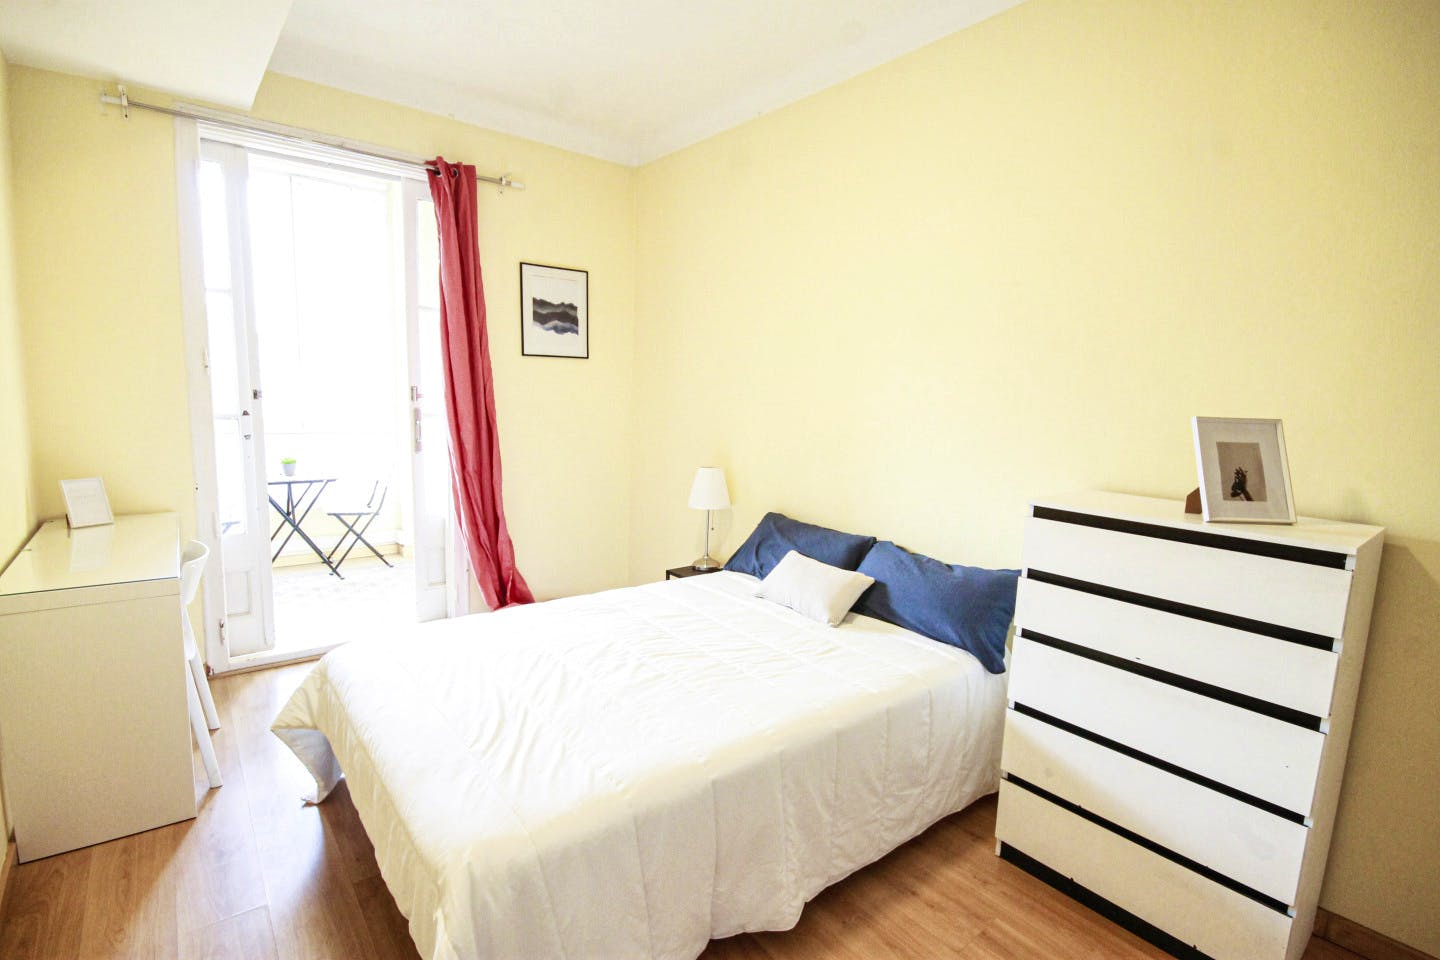 Brilliant apartment nearby the Hospital Clínic Metro Station